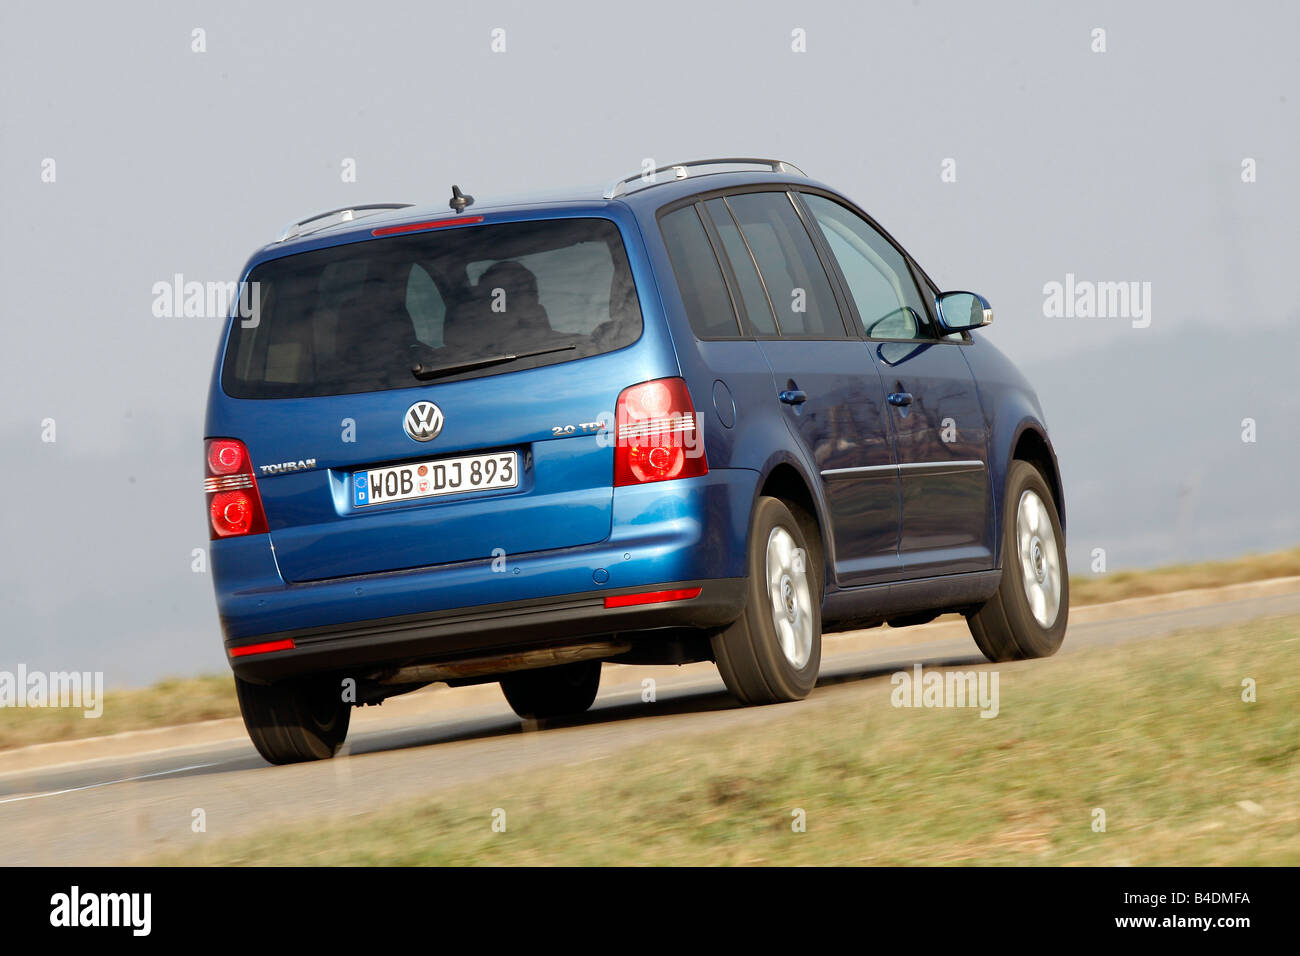 storm premier deuropening VW Volkswagen Touran 2.0 TDI Highline, model year 2007-, blue moving,  diagonal from the back, rear view, country road Stock Photo - Alamy